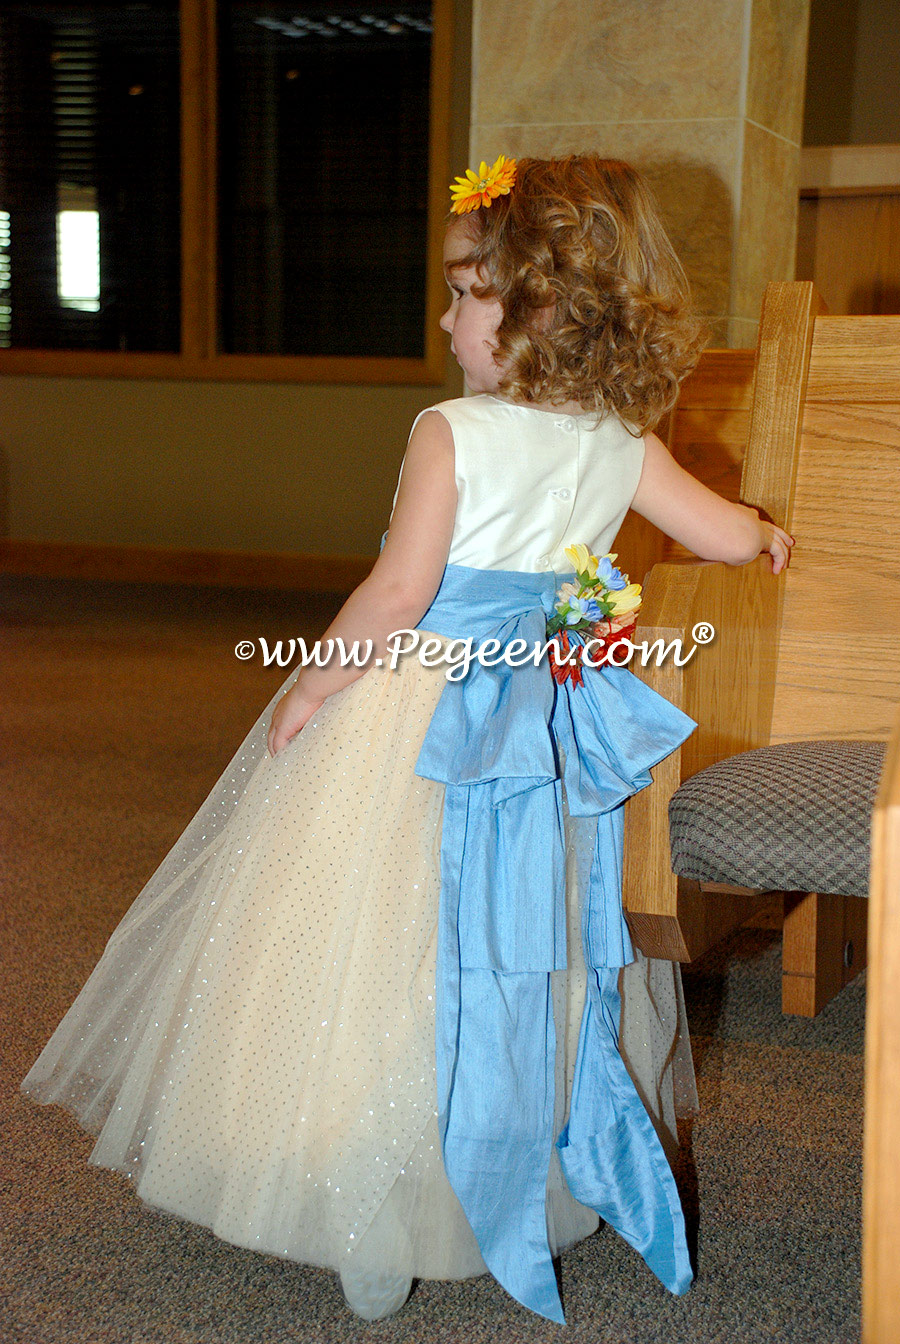 Glitter Tulle Flower Girl Dresses - Pegeen Couture Style 402 with layers and layers of tulle